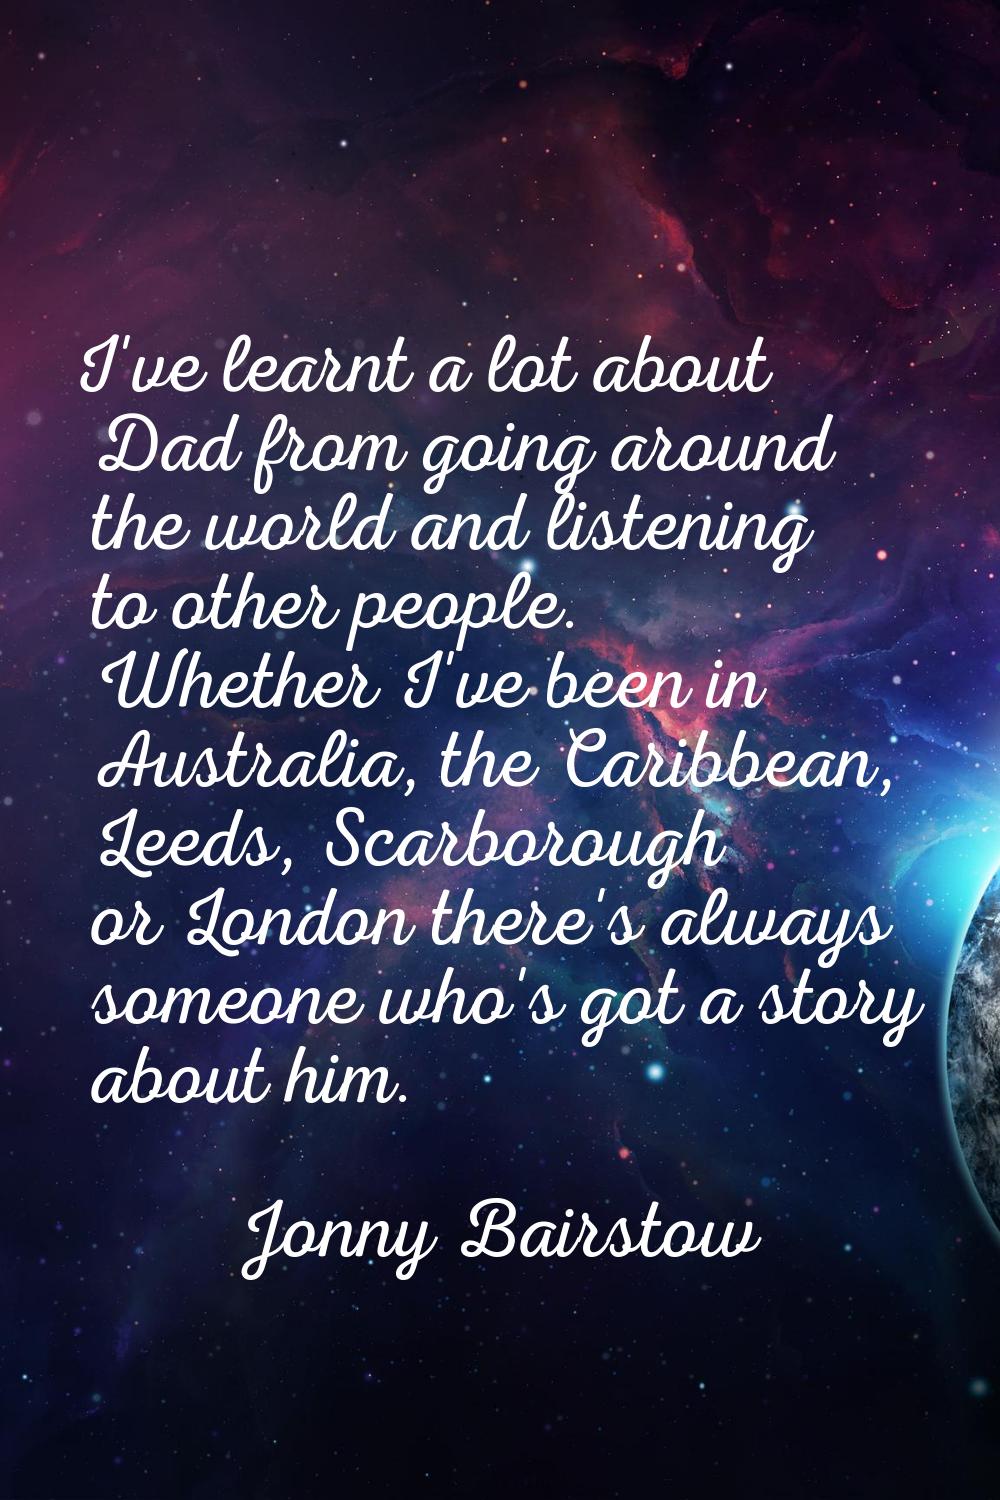 I've learnt a lot about Dad from going around the world and listening to other people. Whether I've